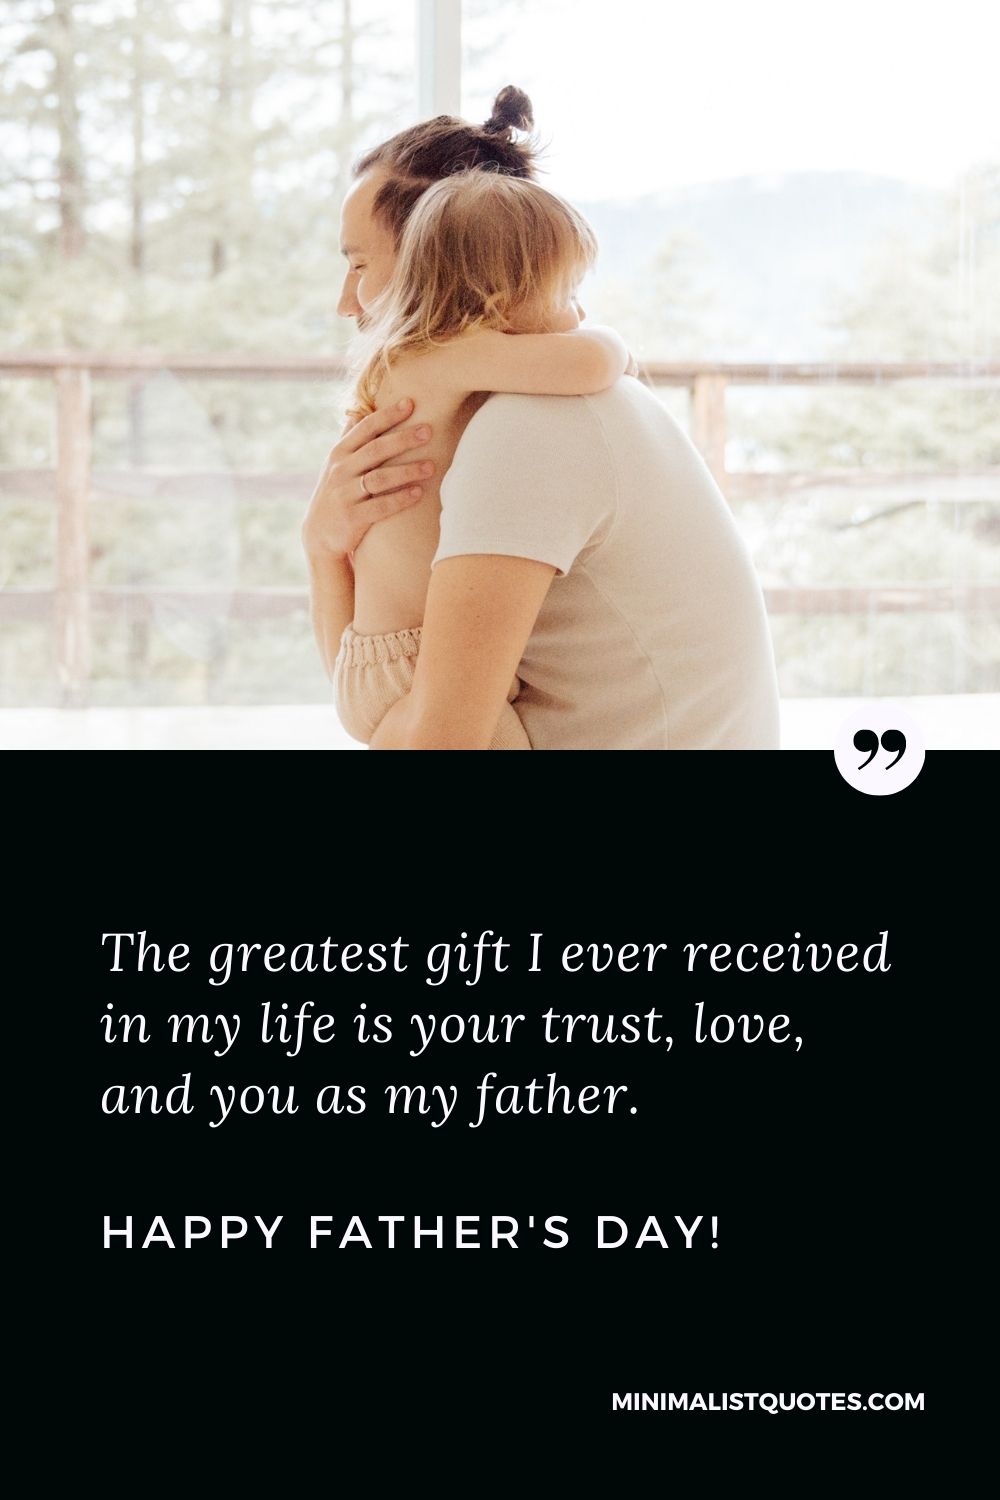 Fathers Day Quote, Wish & Message With Image: The greatest gift I ever received in my life is your trust, love, and you as my father. Happy Fathers Day!